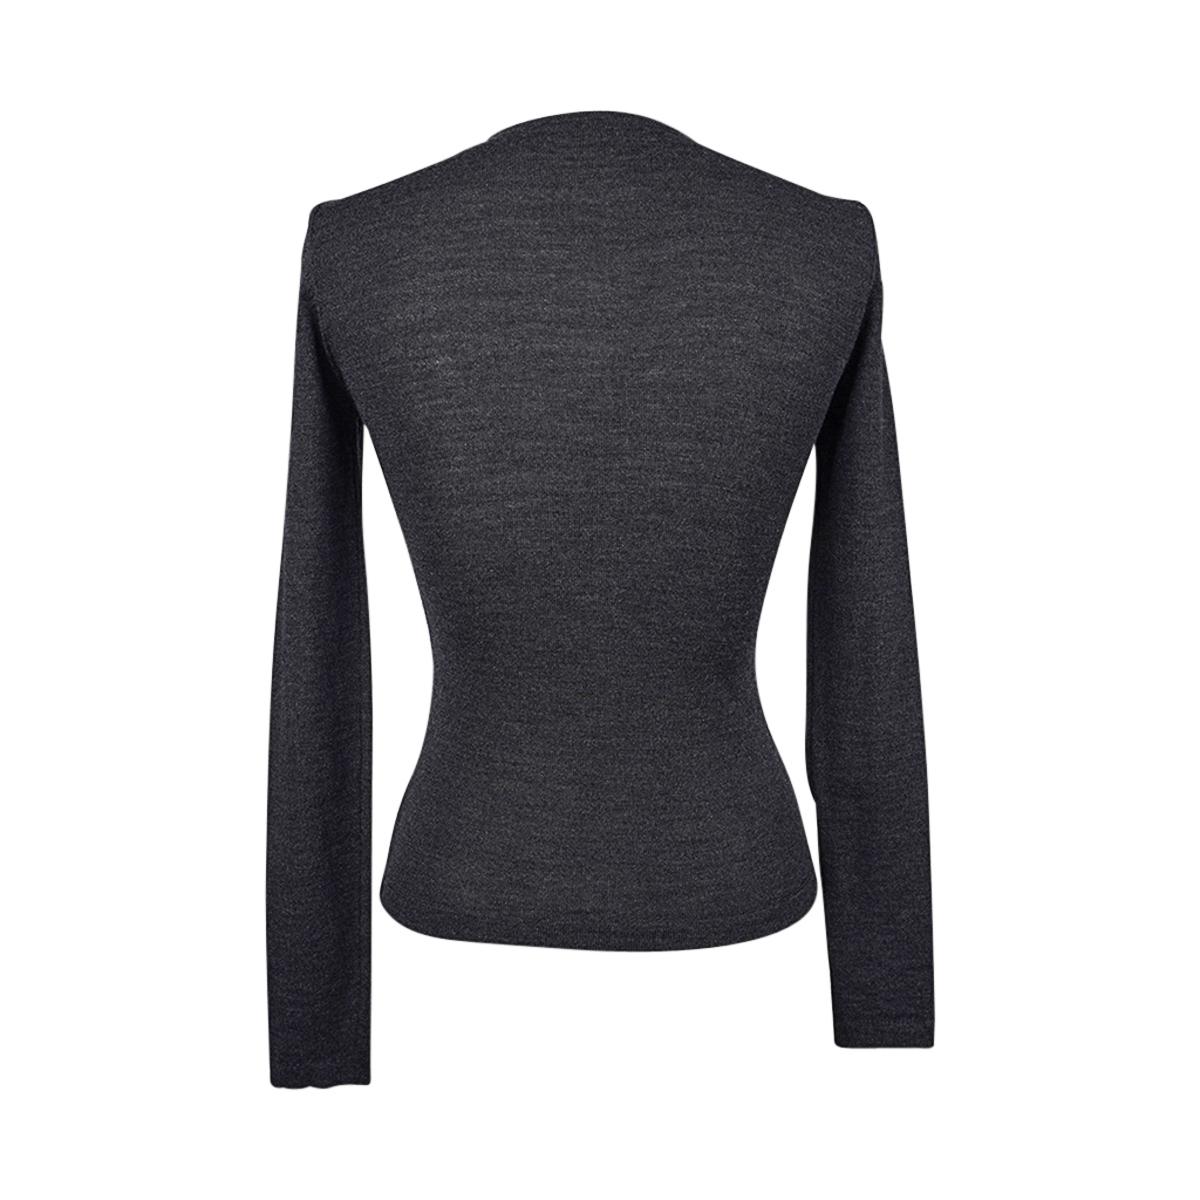 Mugler Vintage Charcoal Gray Knit Top Classic S 5